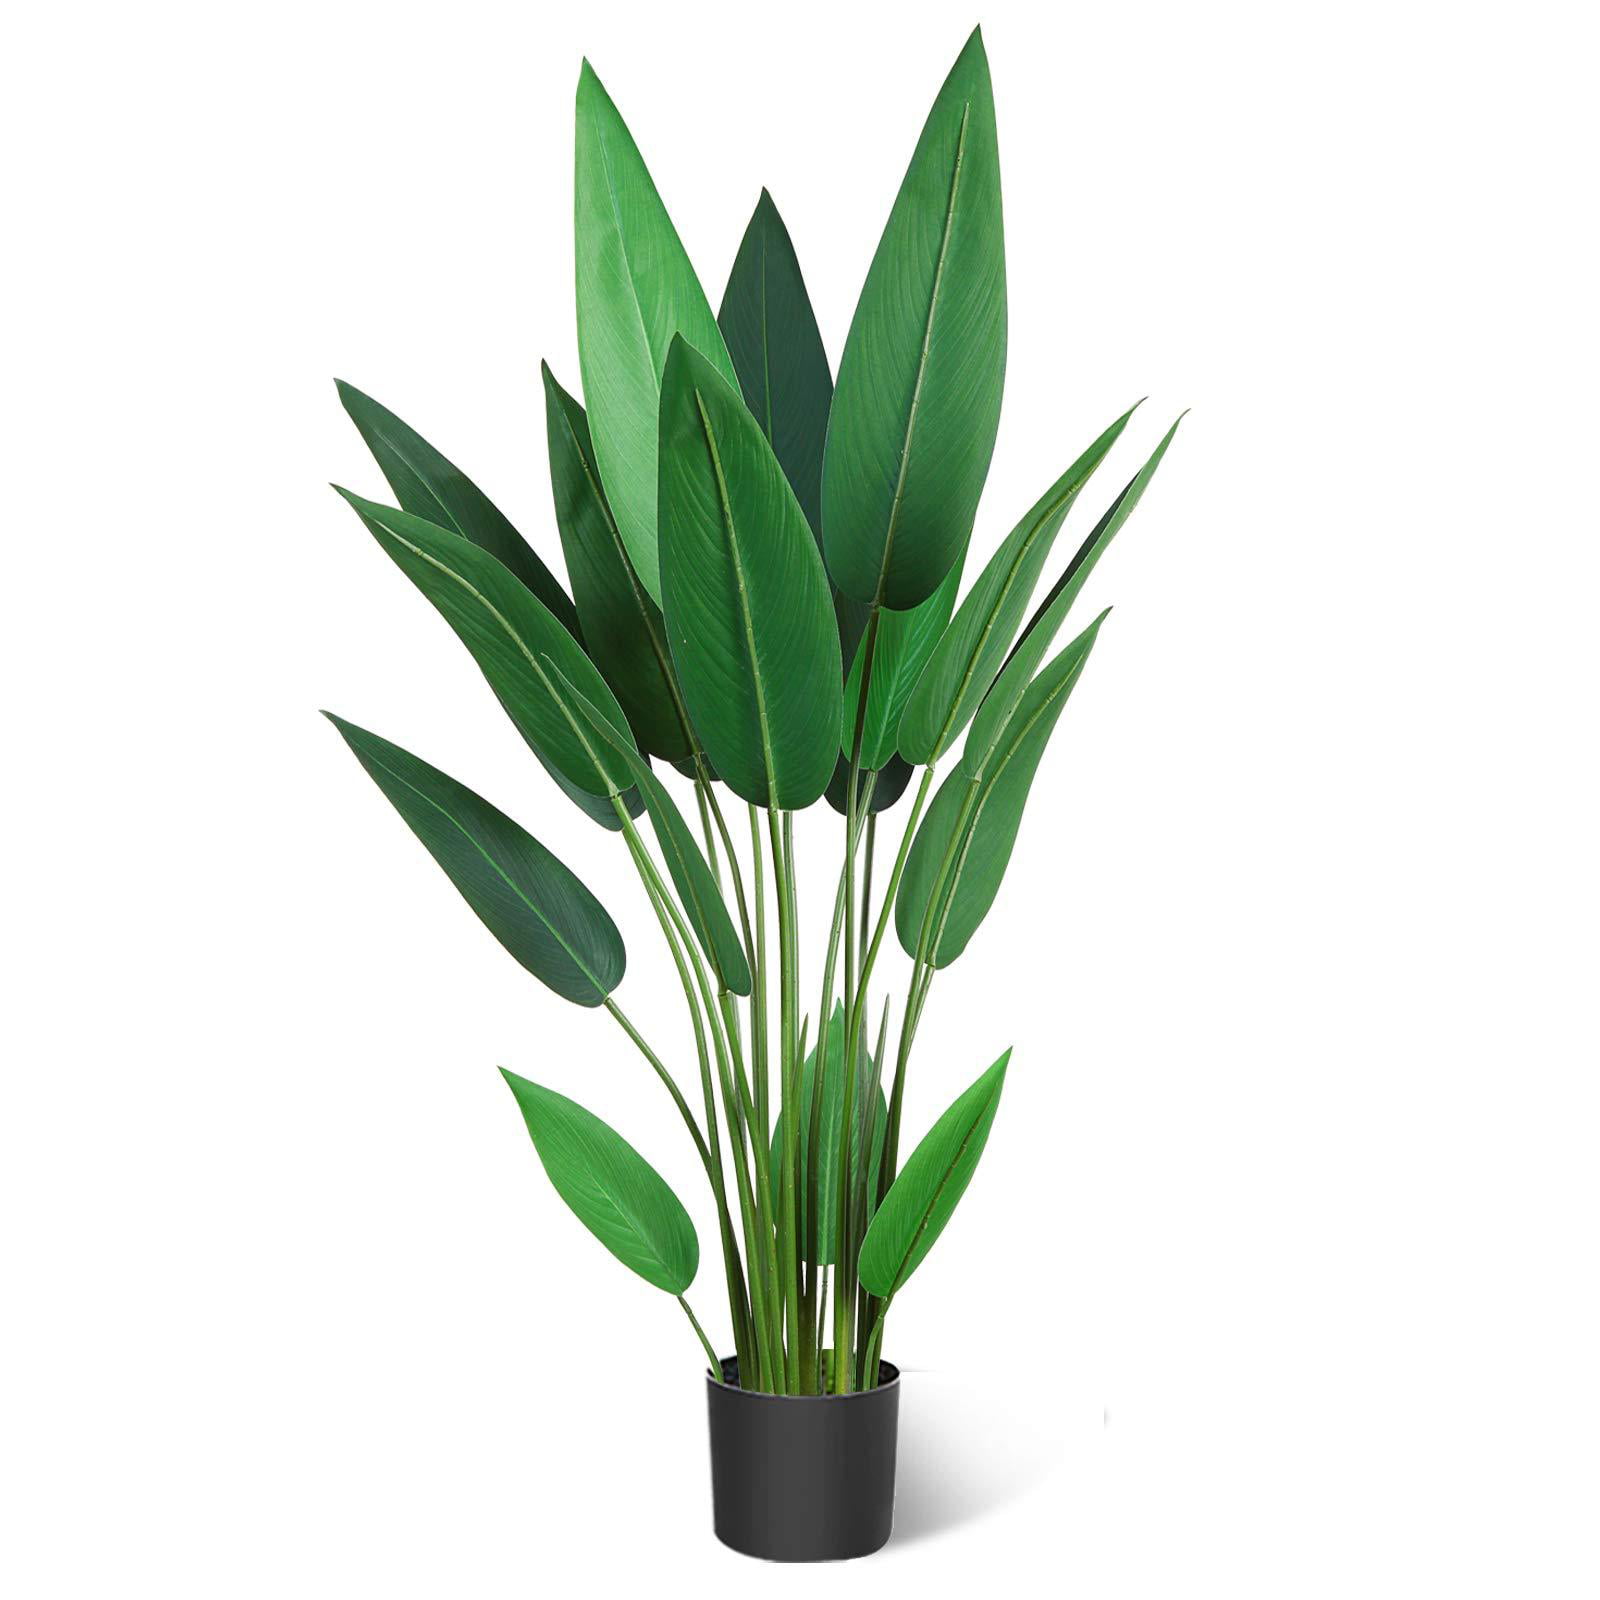 43 inch kutuuhome Artificial Canna Lily Tree Fake Tropical Palm Tree Perfect Large Faux Silk Plants in Pot for Indoor Outdoor House Home Office Garden Modern Decoration Housewarming Gift